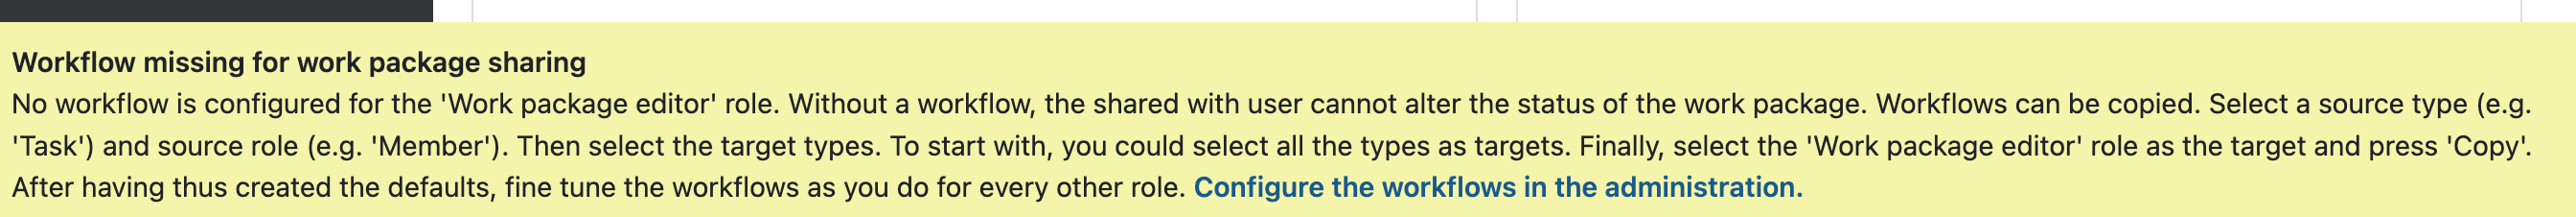 Message on not configured work package editor workflows